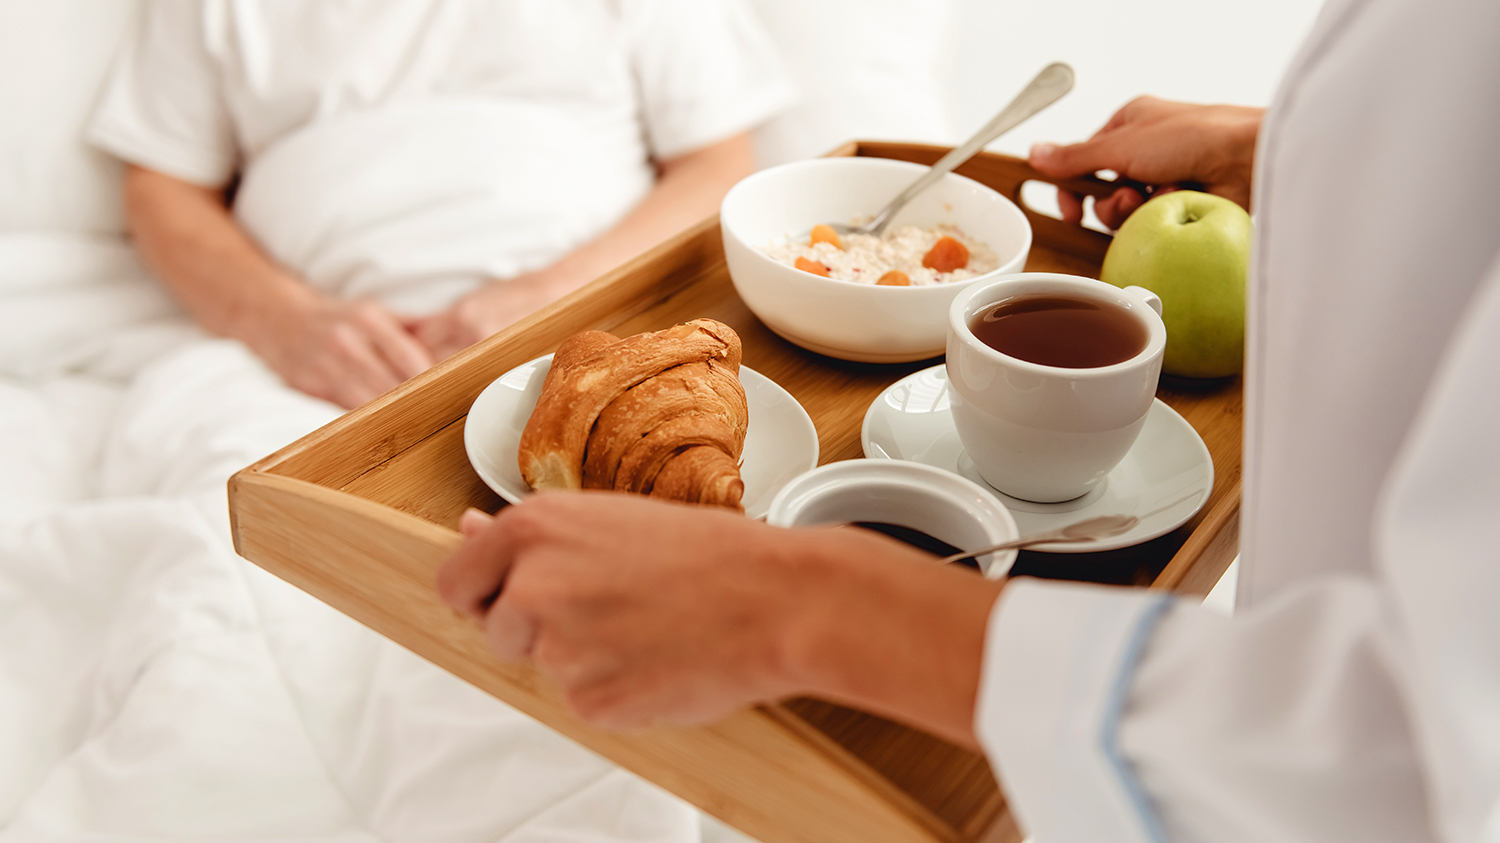 A tray of food being delivered to a patient in a hospital bed